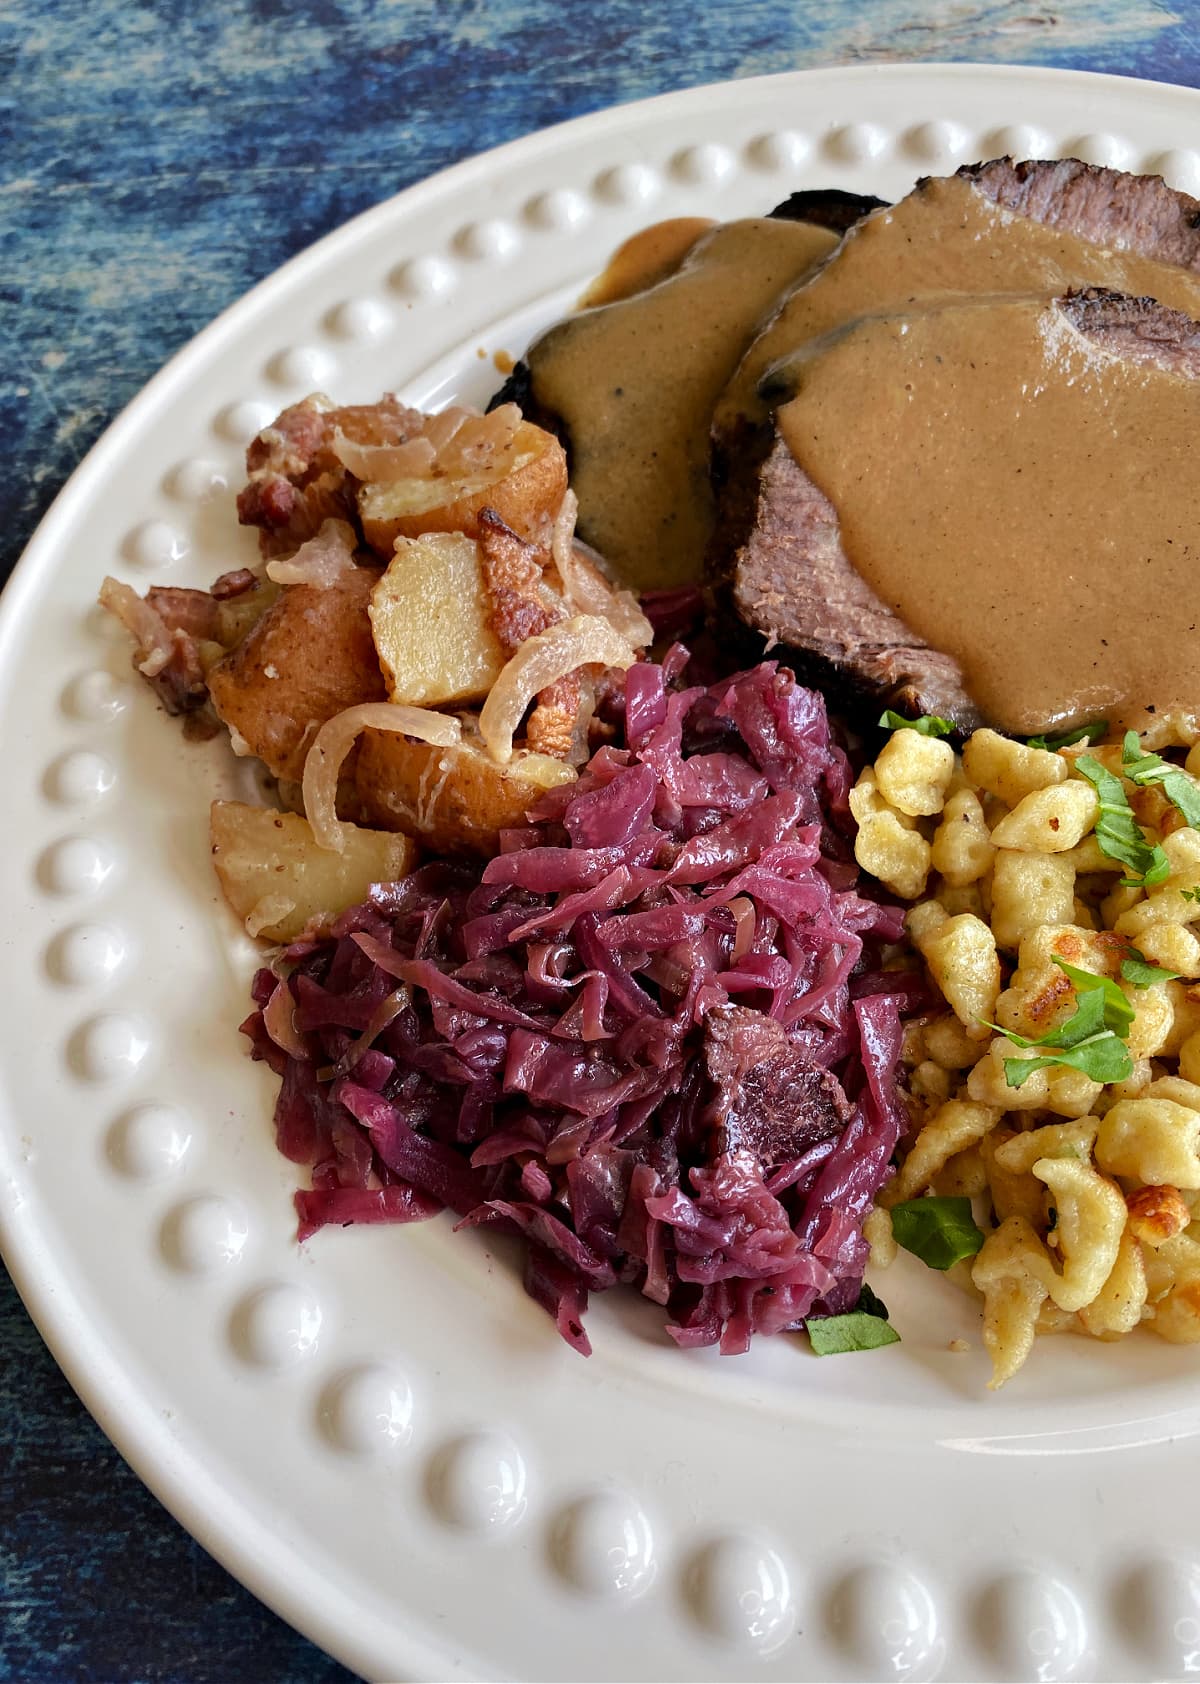 German red cabbage plated with spaetzle, sauerbraten, and german potato salad for Oktoberfest. 